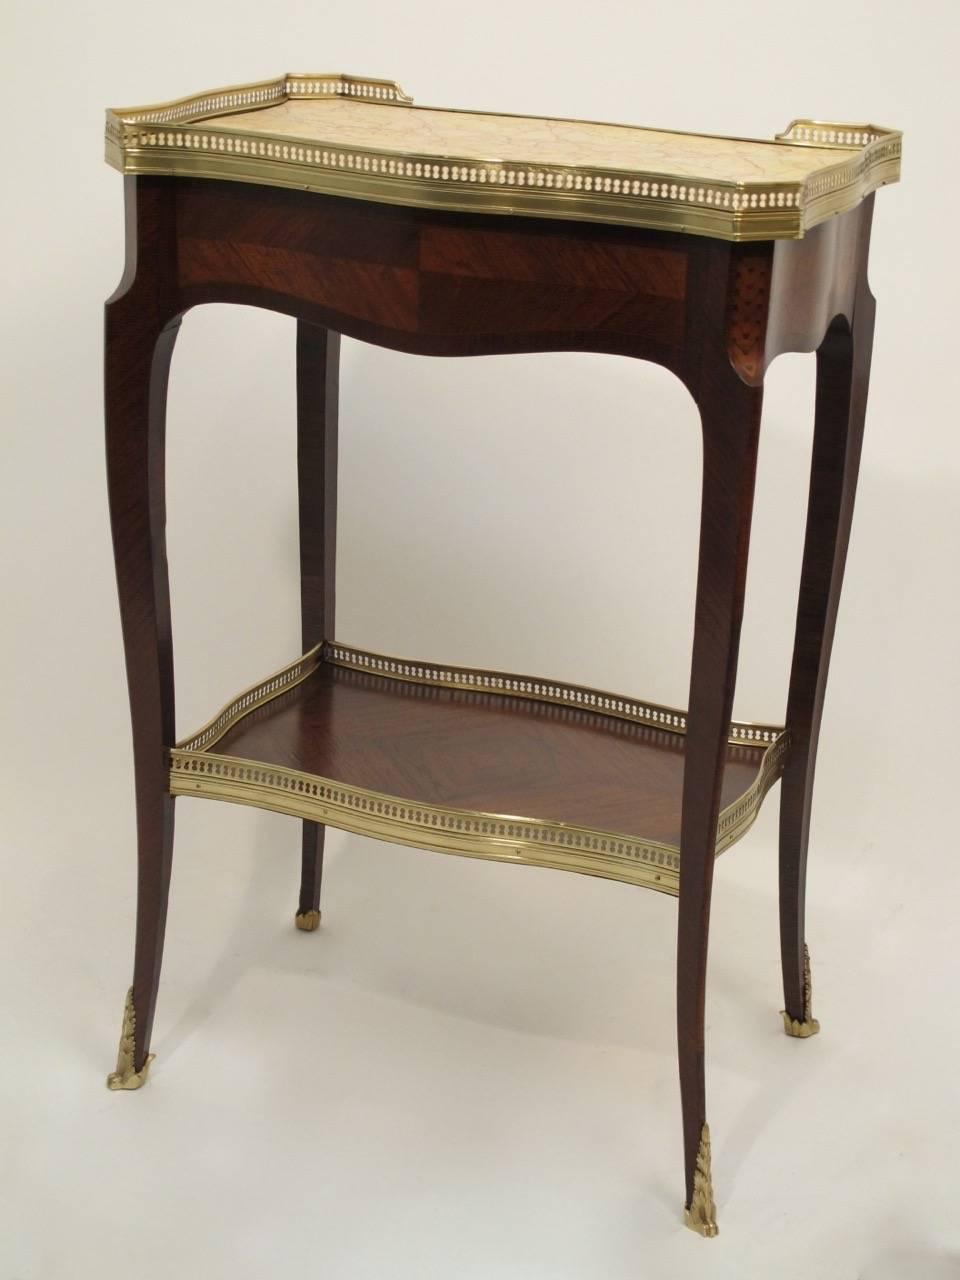 Mahogany Louis XVI side table with brass gallery around inset marble top. Having herringbone inlay detail, canted corners, and cabriole legs ending in brass sabots. French, circa 1890.